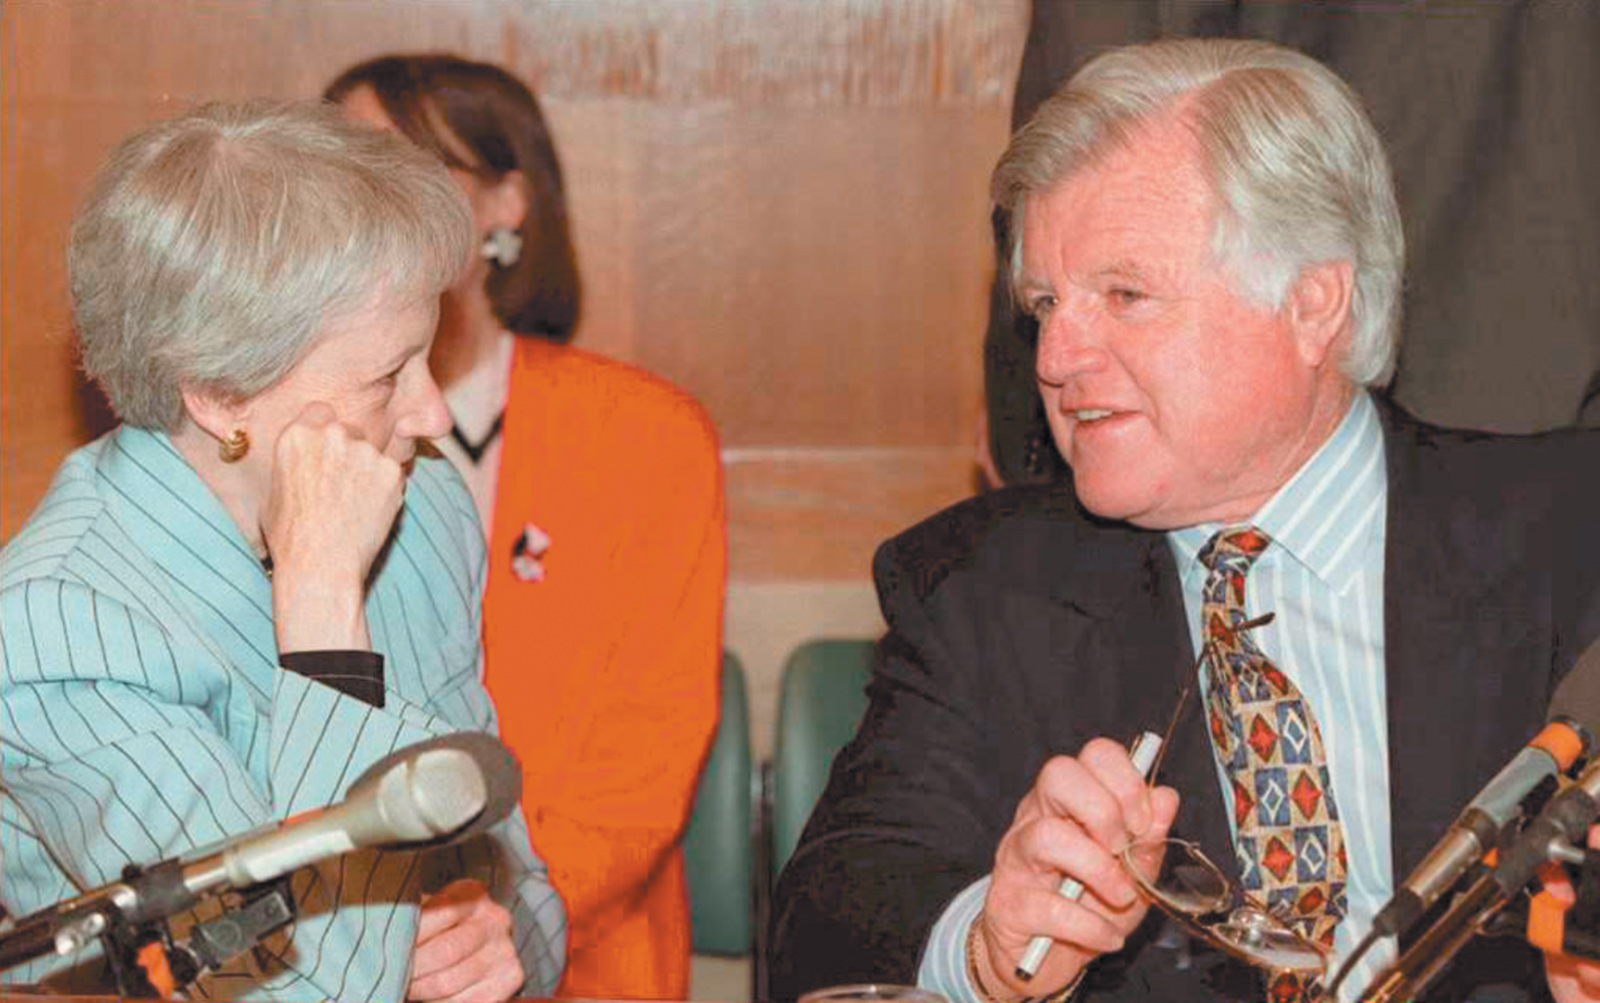 Ted Kennedy with Republican senator Nancy Kassebaum of Kansas at a meeting of the Senate Labor and Human Resources Committee, Washington, D.C., May 1995